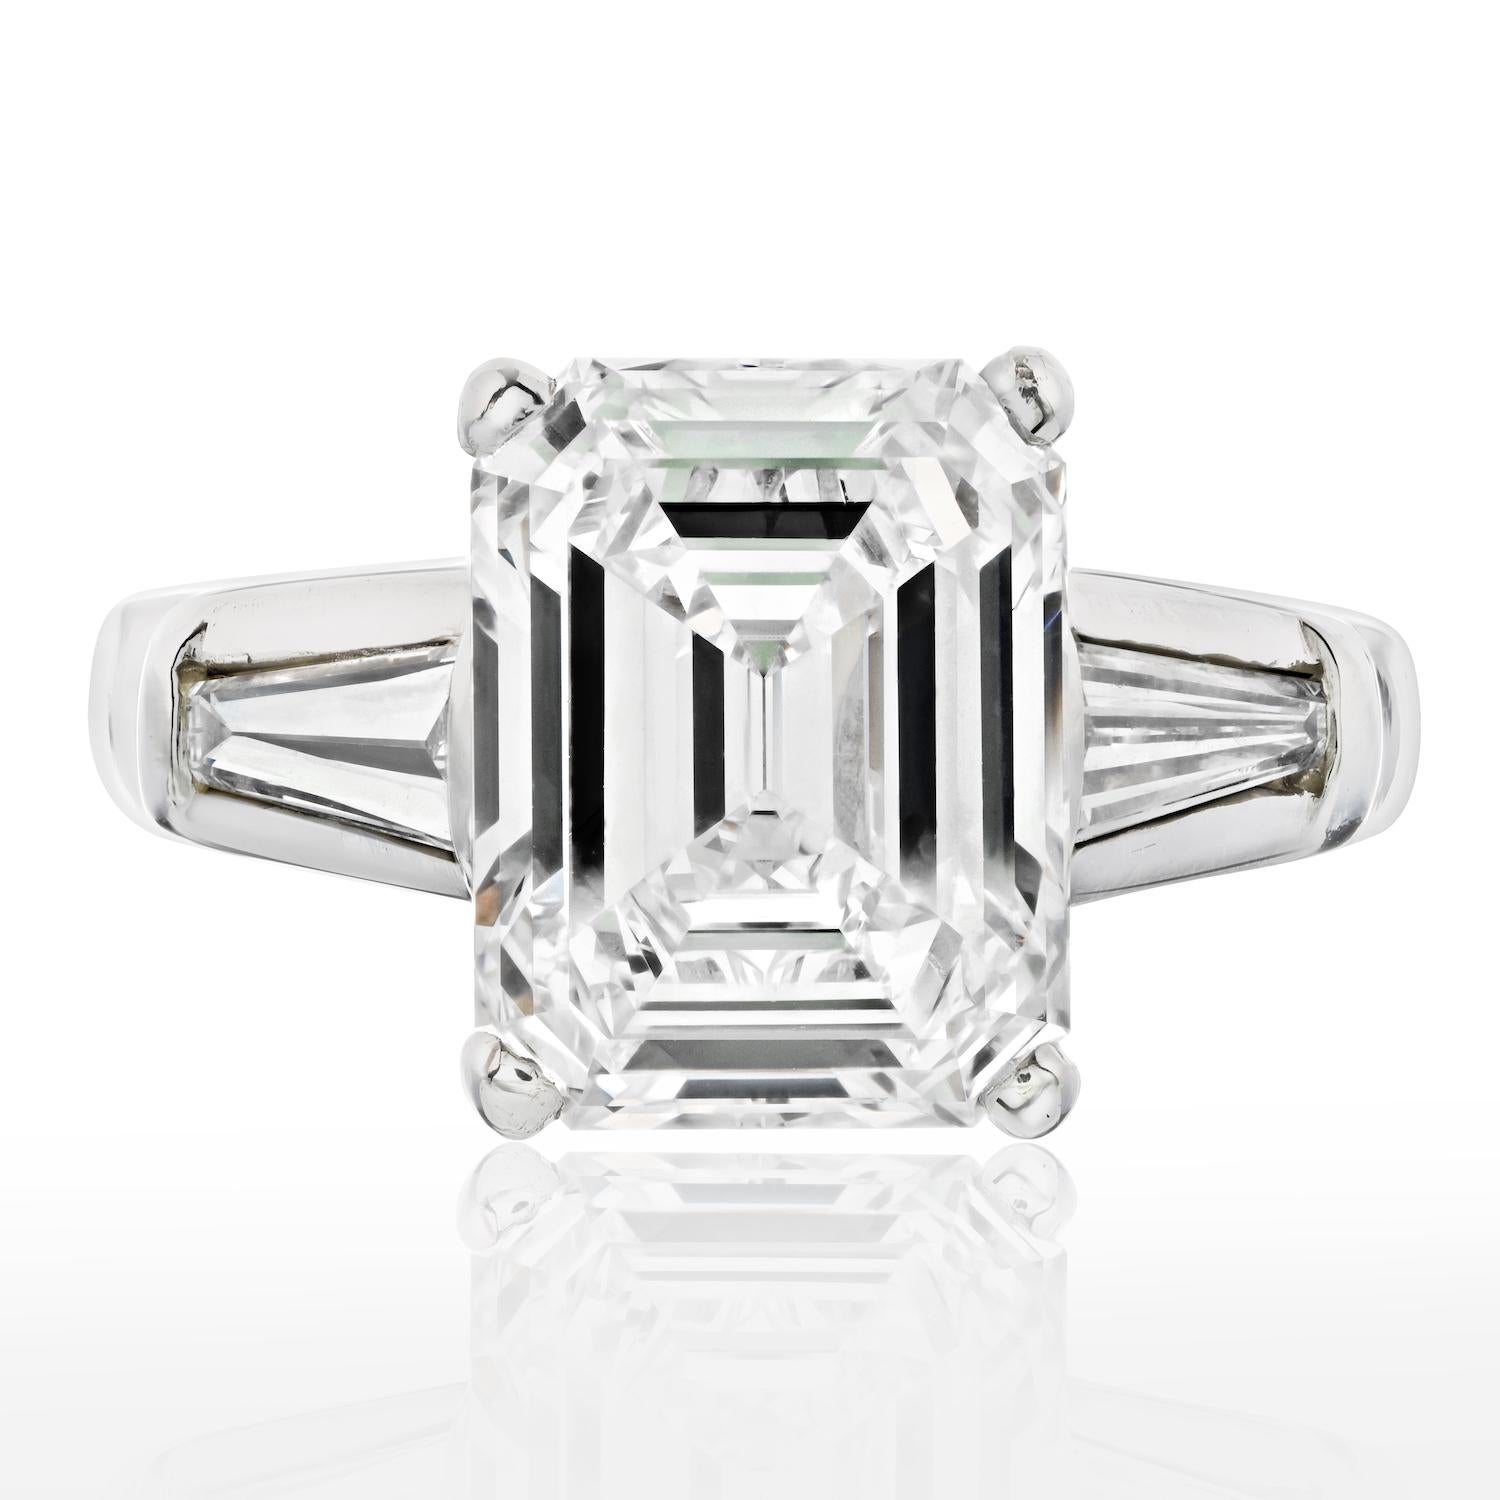 Stunning ring when you want to show up! Mounted with an impressive 4 carat Emerald Cut Diamond that is mounted in platinum accented by baguette cuts. 
The Center diamond is a certified K/VS2 GIA stone. 
Three-stone diamond engagement rings have